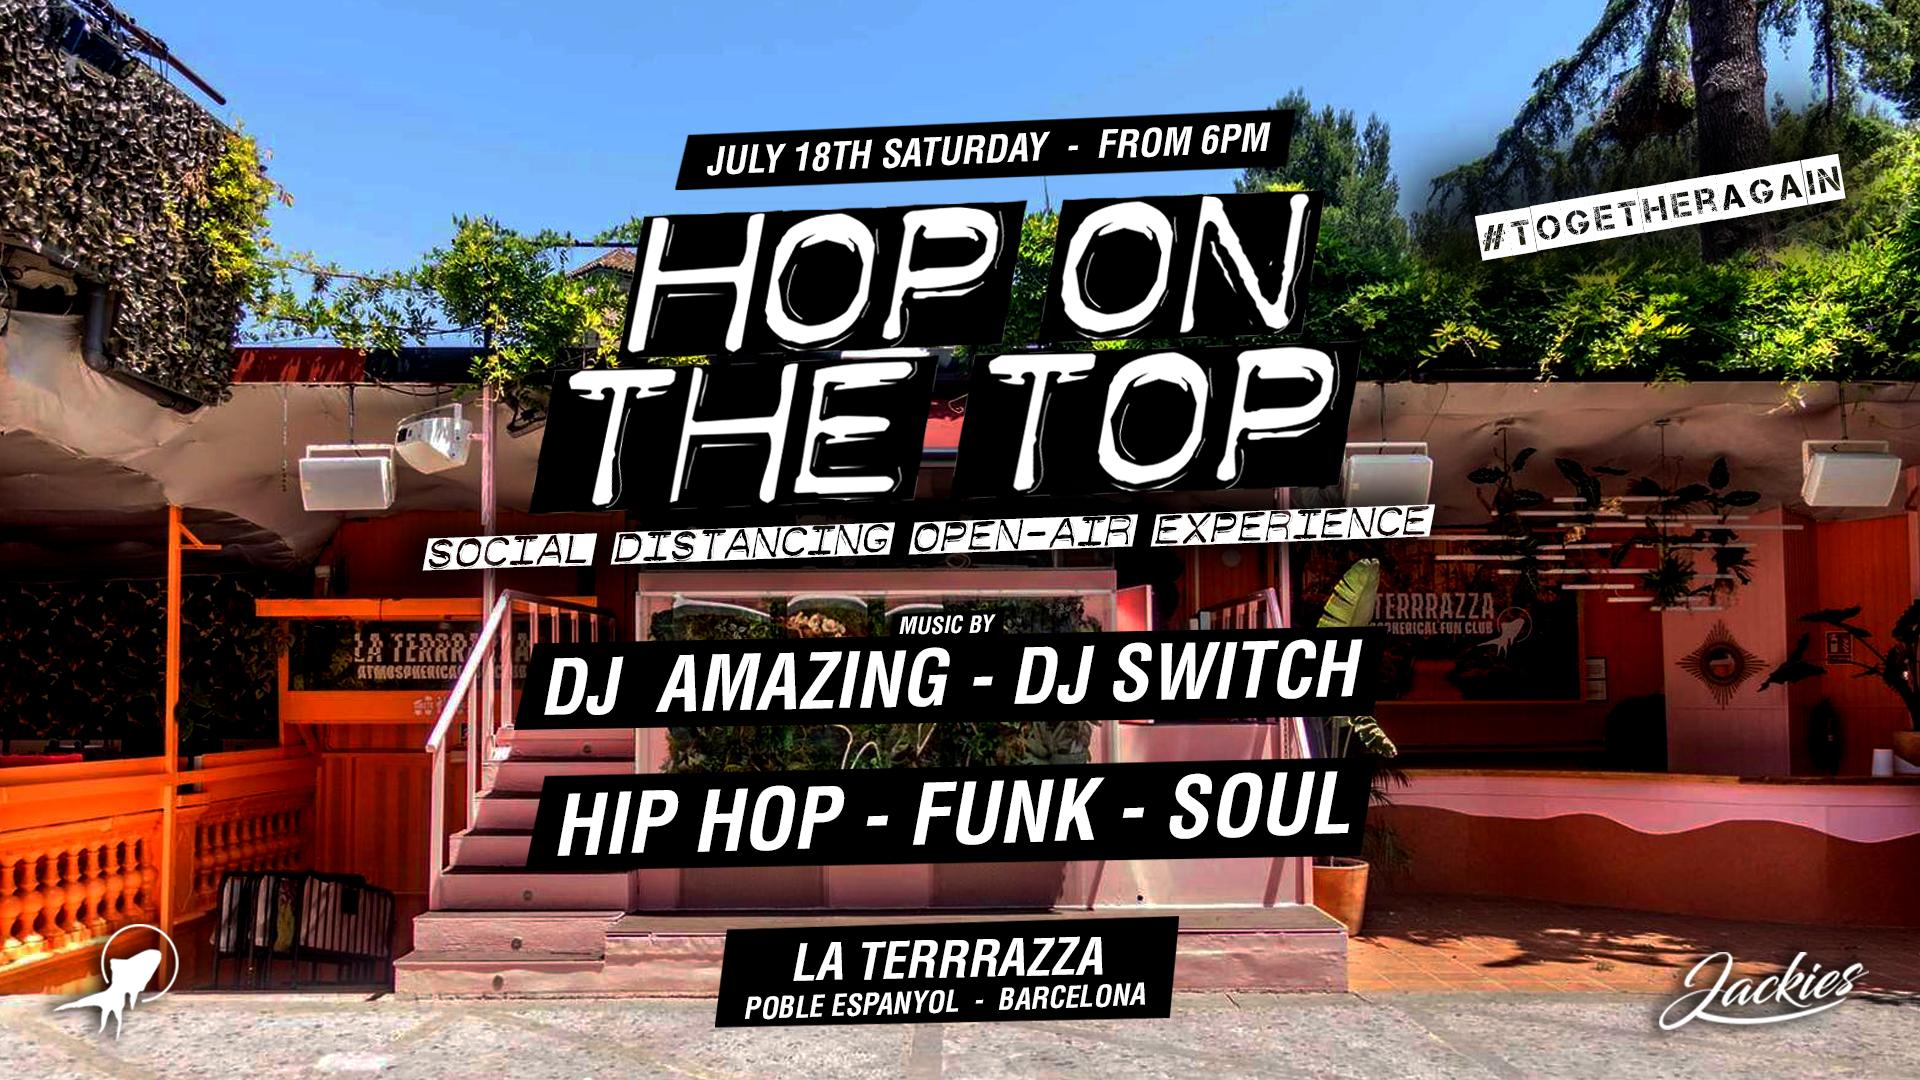 CANCELLED Jackies pres: Hop On The Top Open Air - Hip Hop,Funk&Soul